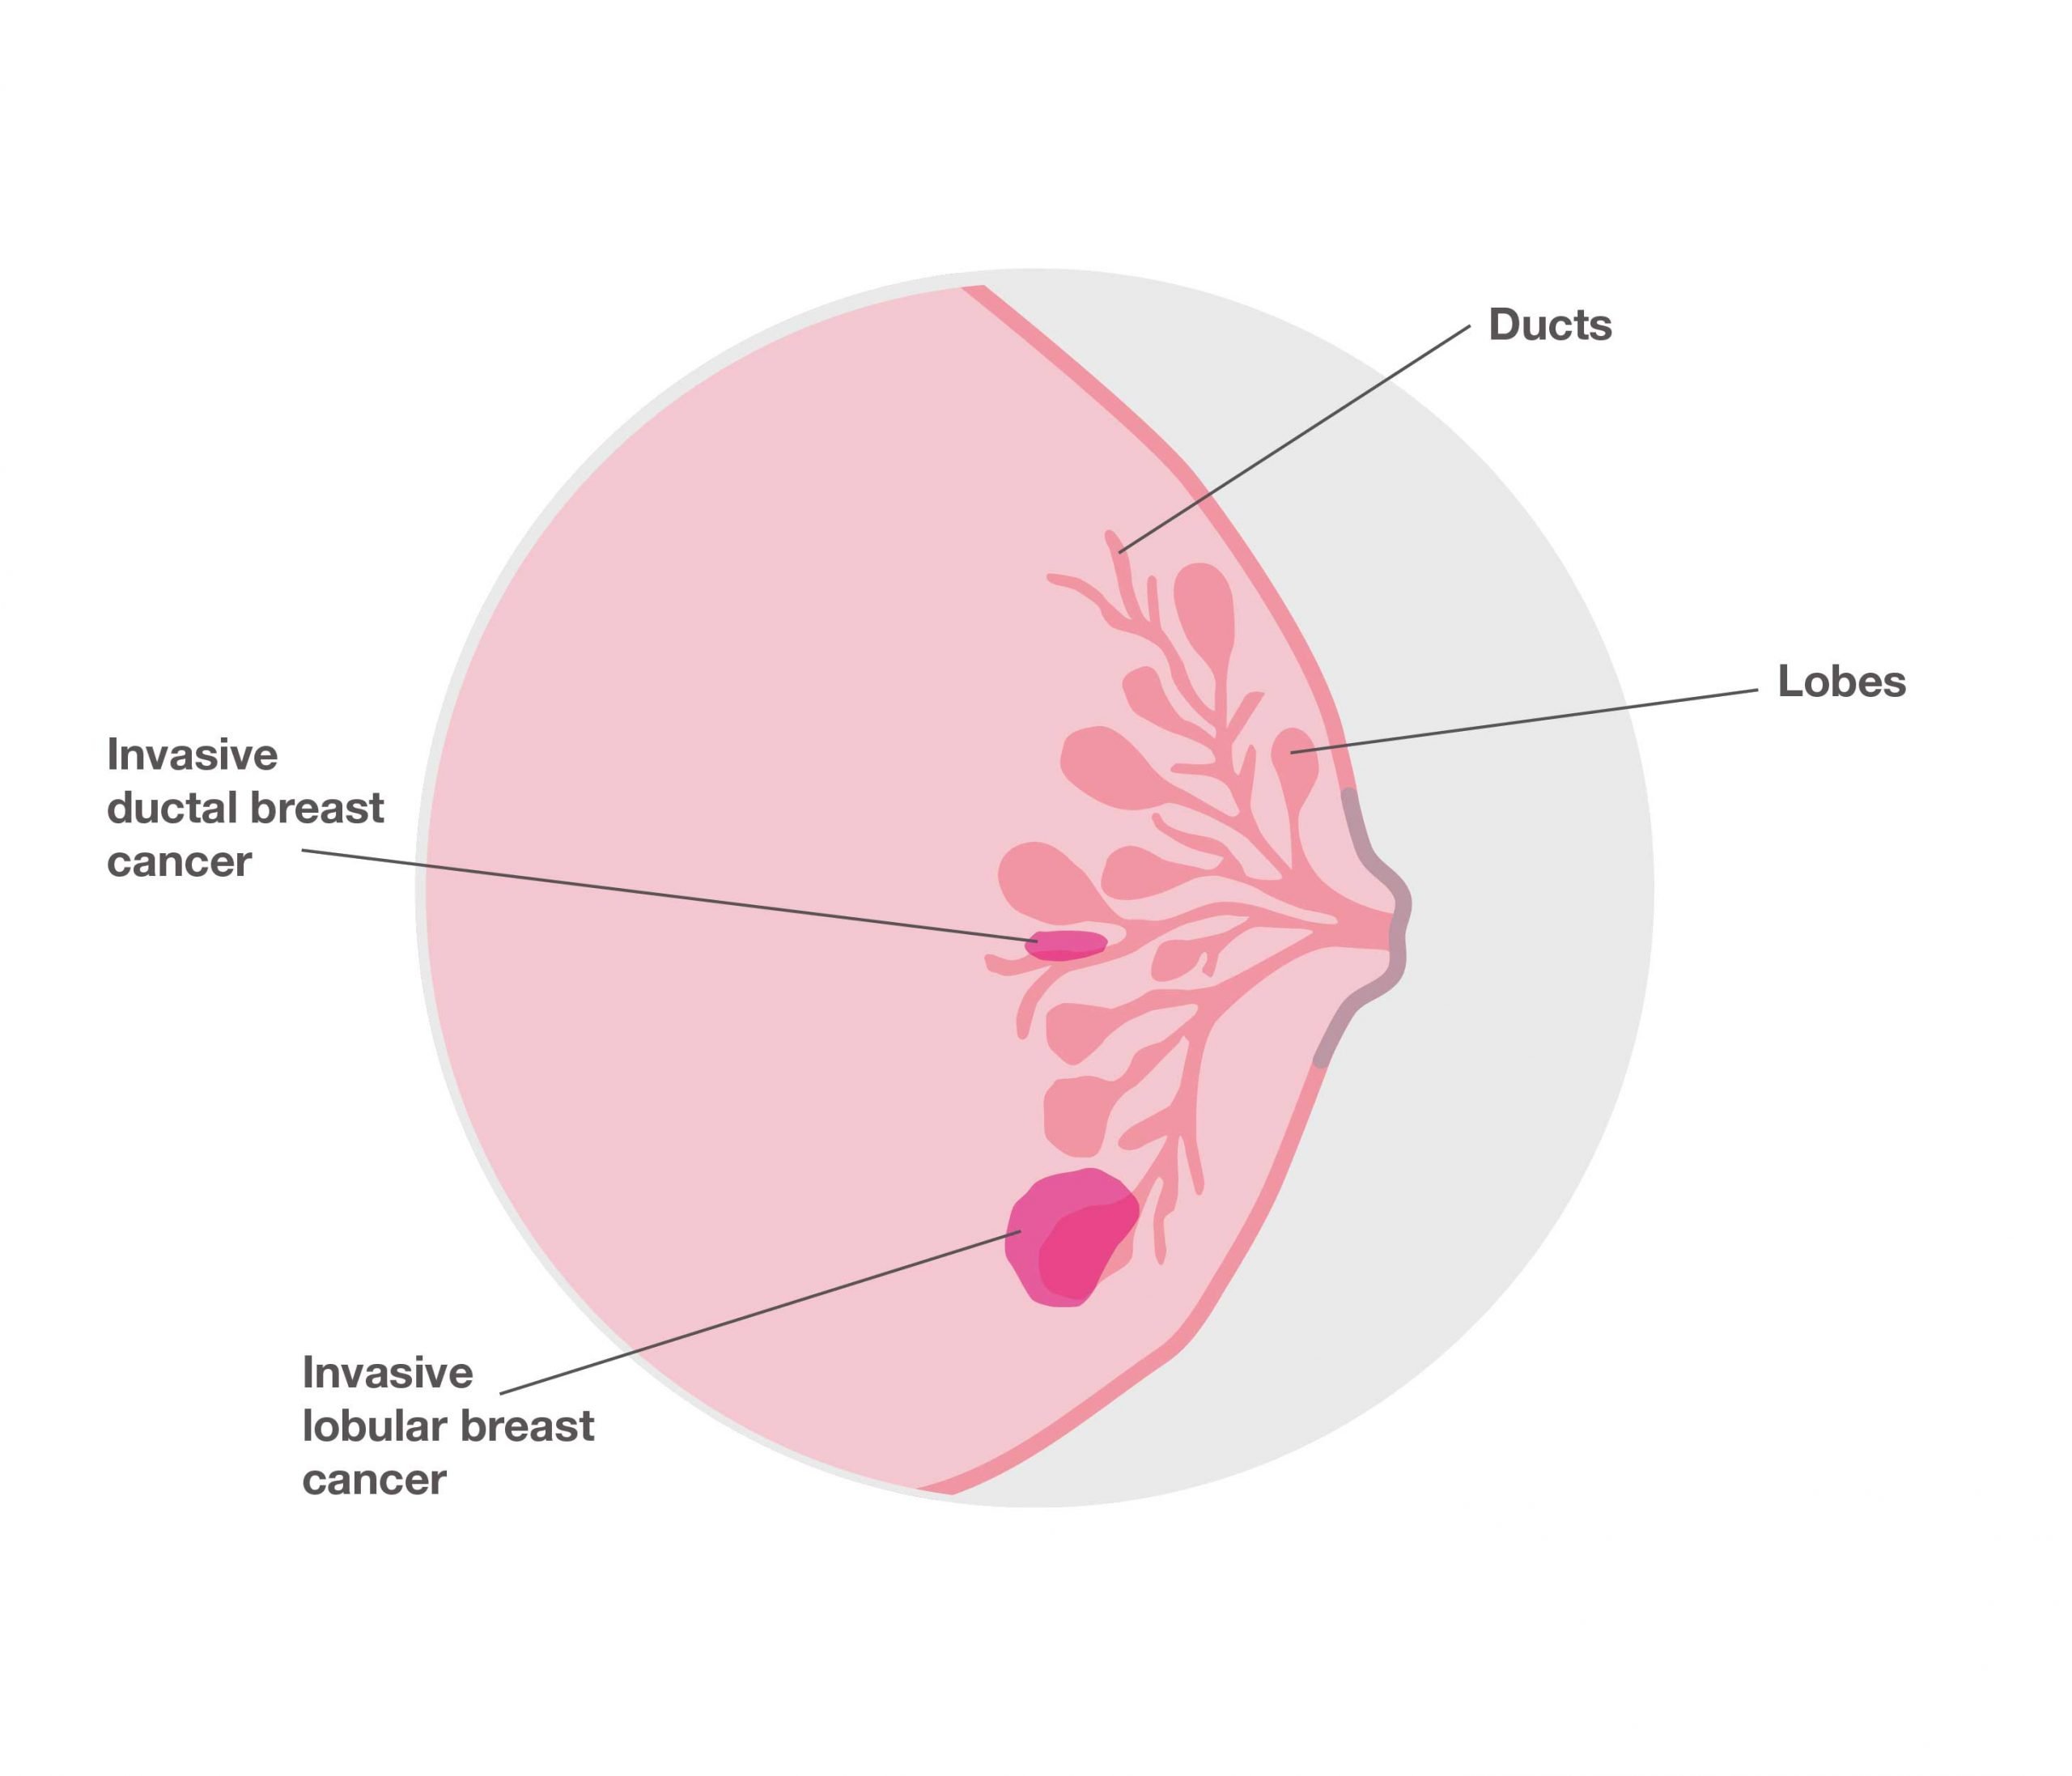 A new lethal weapon against lobular breast cancer